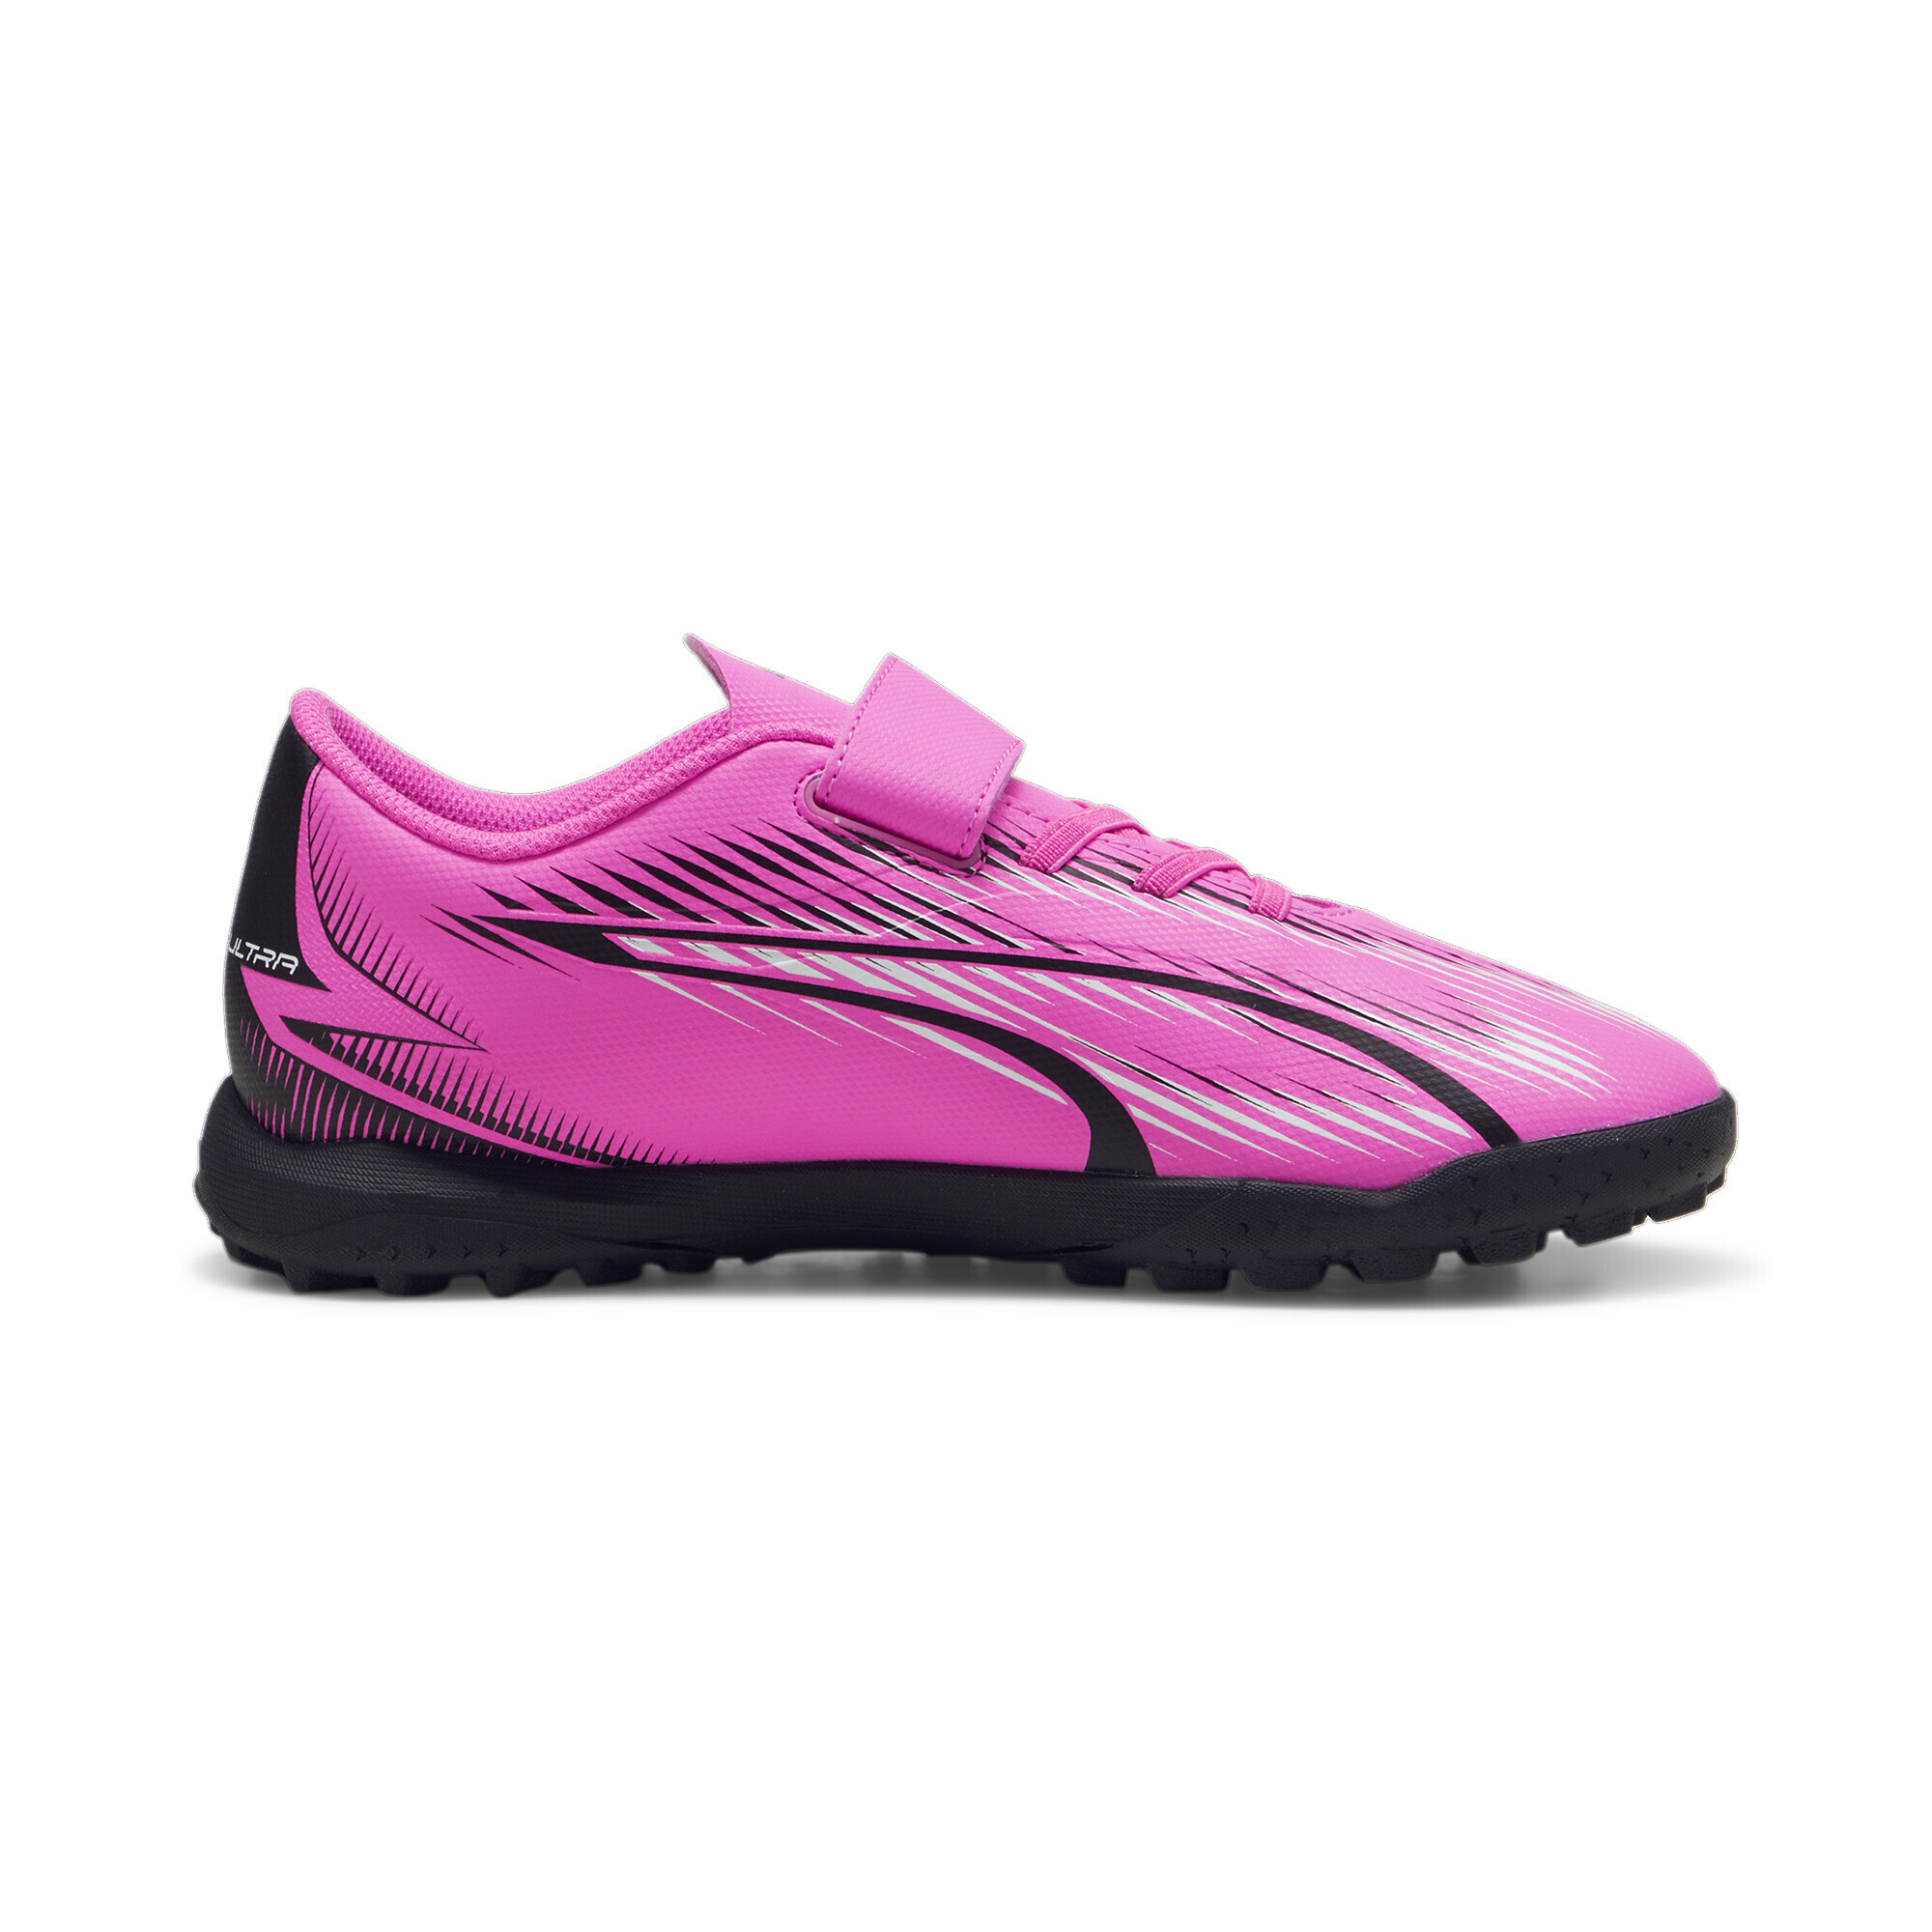 PUMA ULTRA PLAY TT Youth Football Boots In Pink, Size EU 34.5